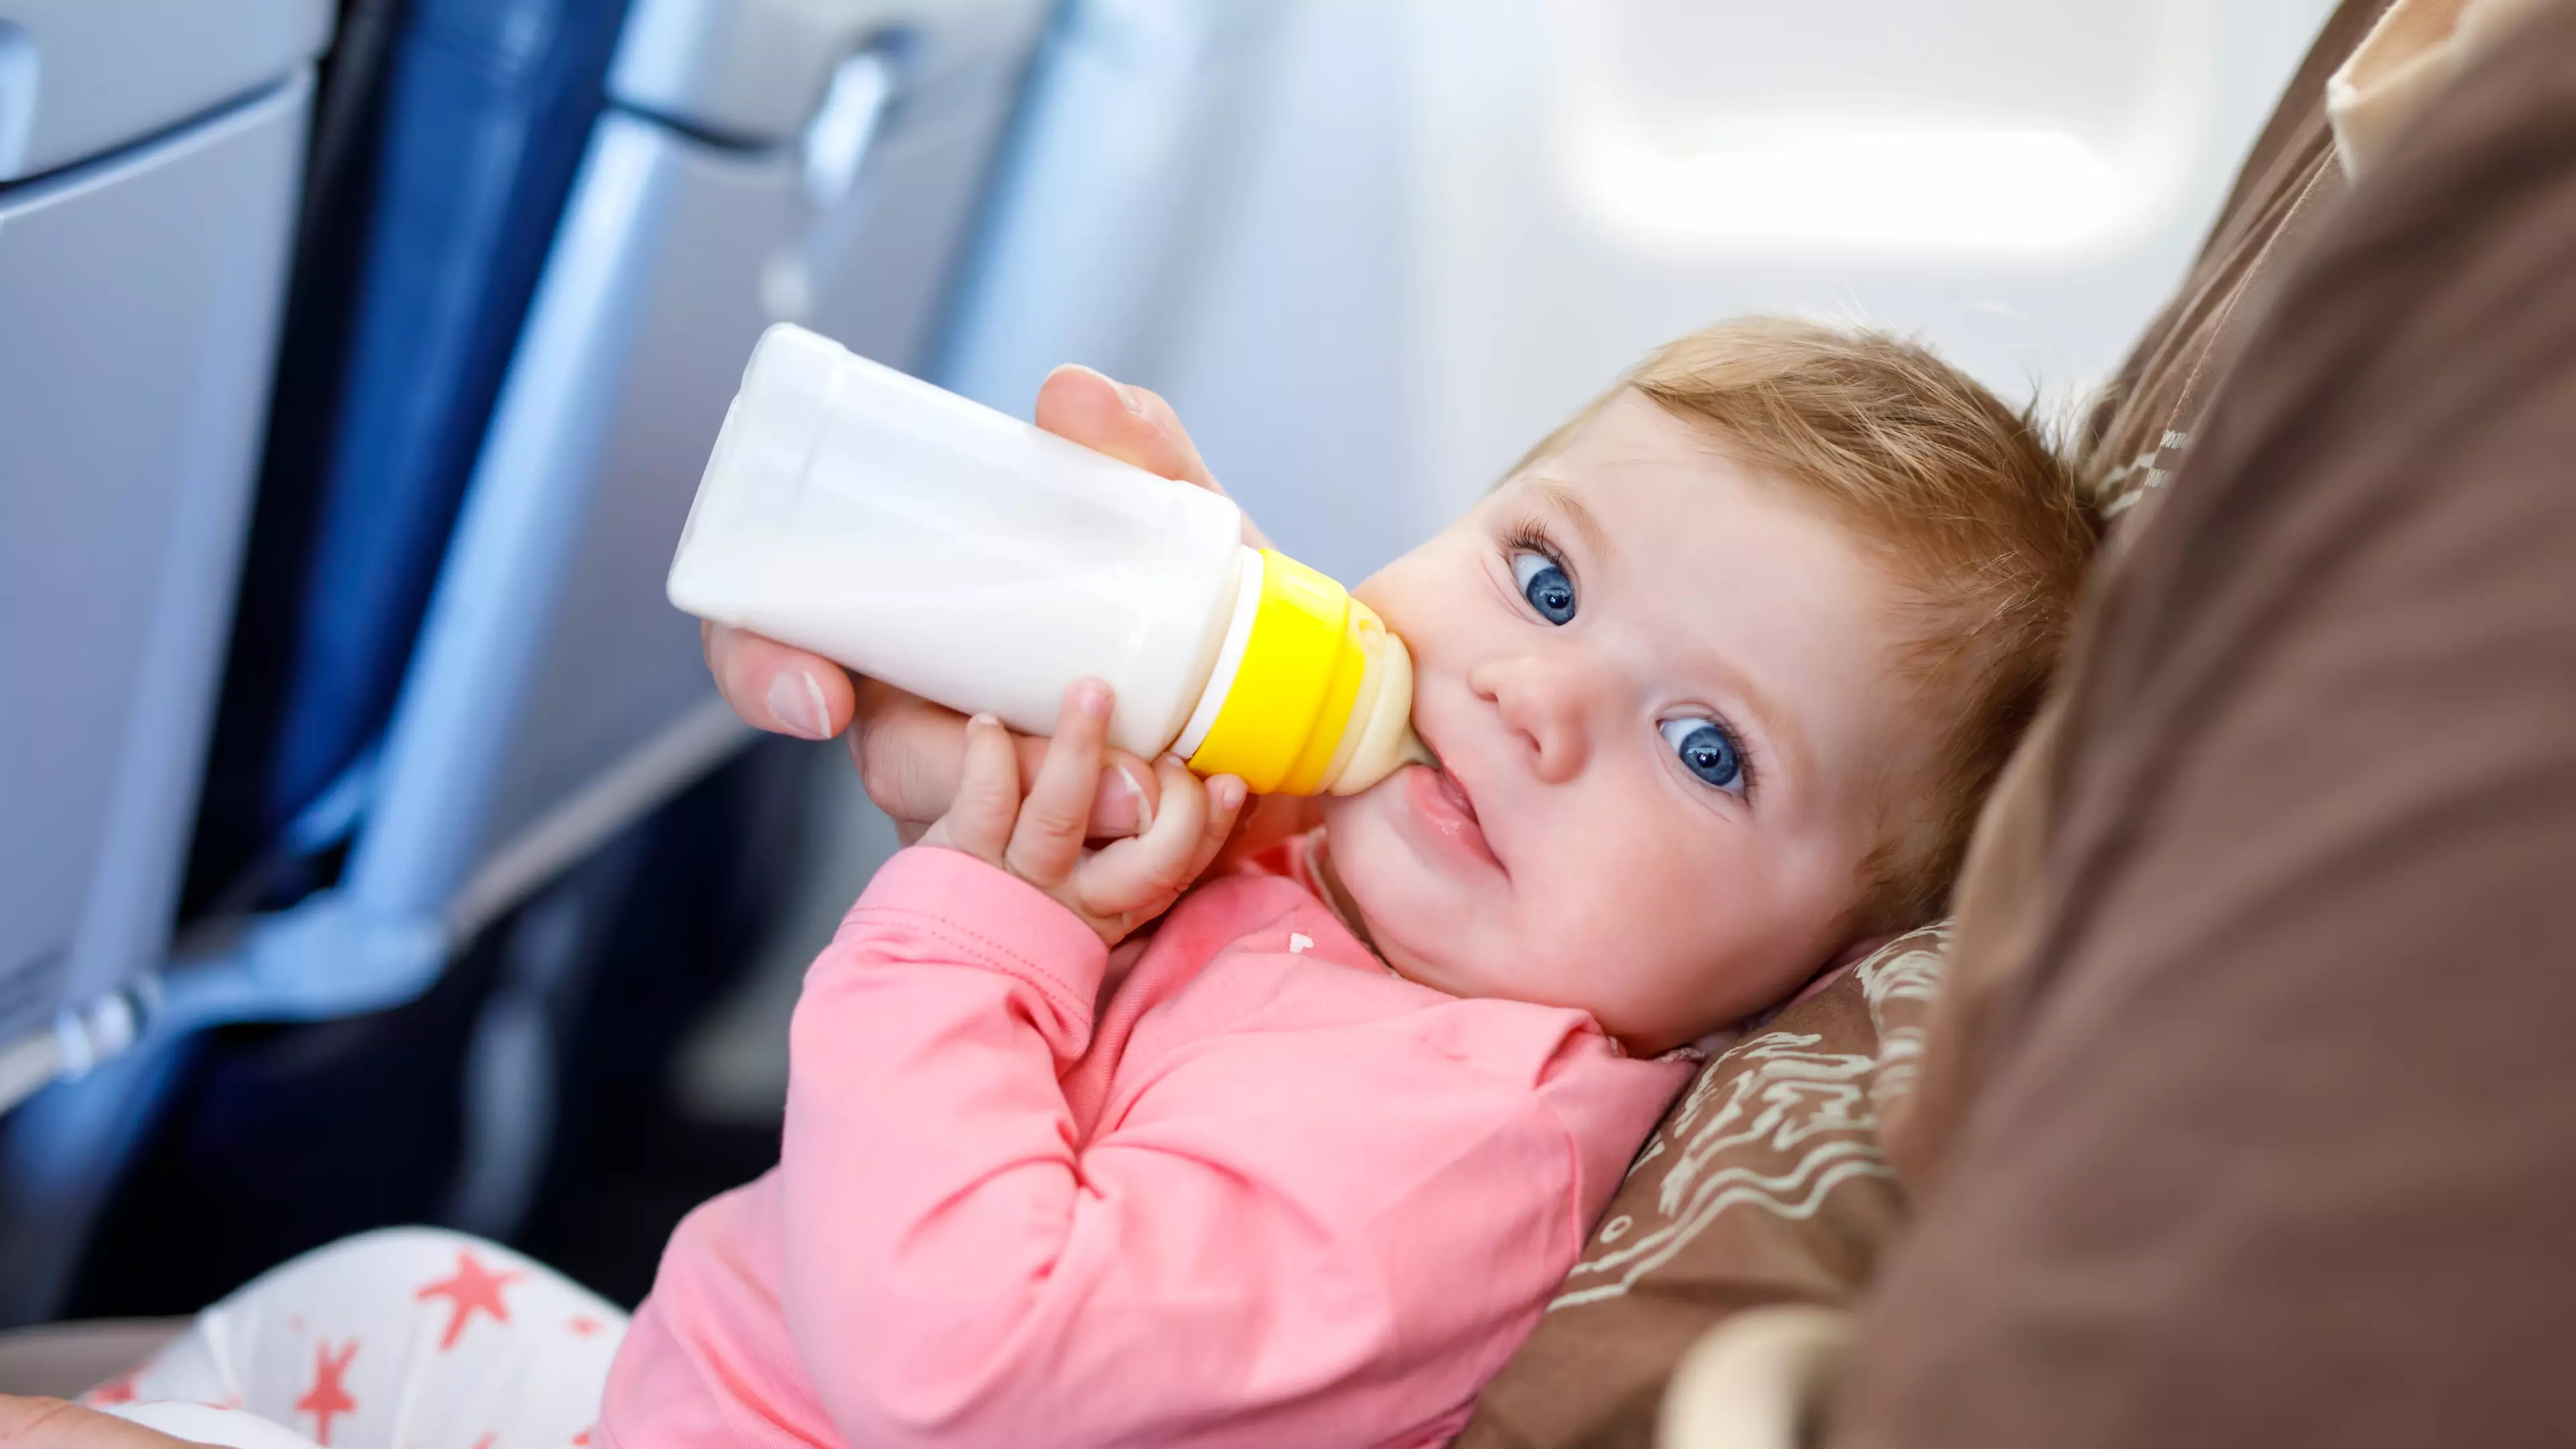 Airline Tells Passengers Where Babies Are Seated On A Plane So They Can Avoid Them